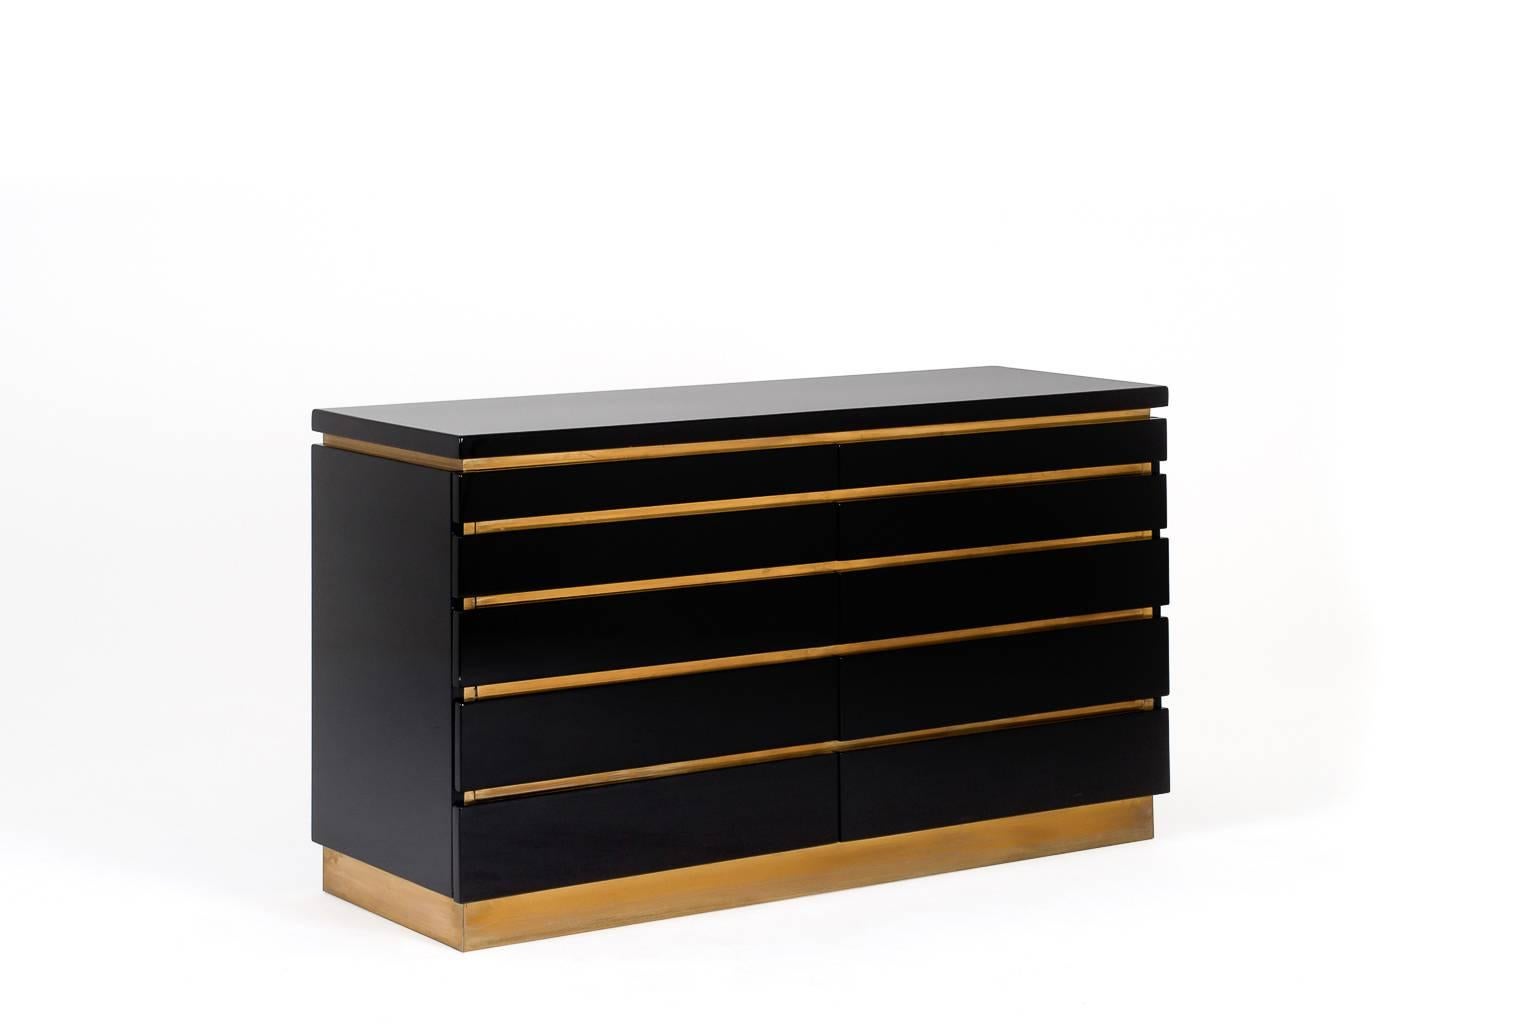 Stunning black lacquered chest of drawers by Jean Claude Mahey, France, 1970s. High quality piece, wooden base finished in a high gloss black lacquer and chic brass details. Provided with ten drawers. In excellent condition with a beautiful warm